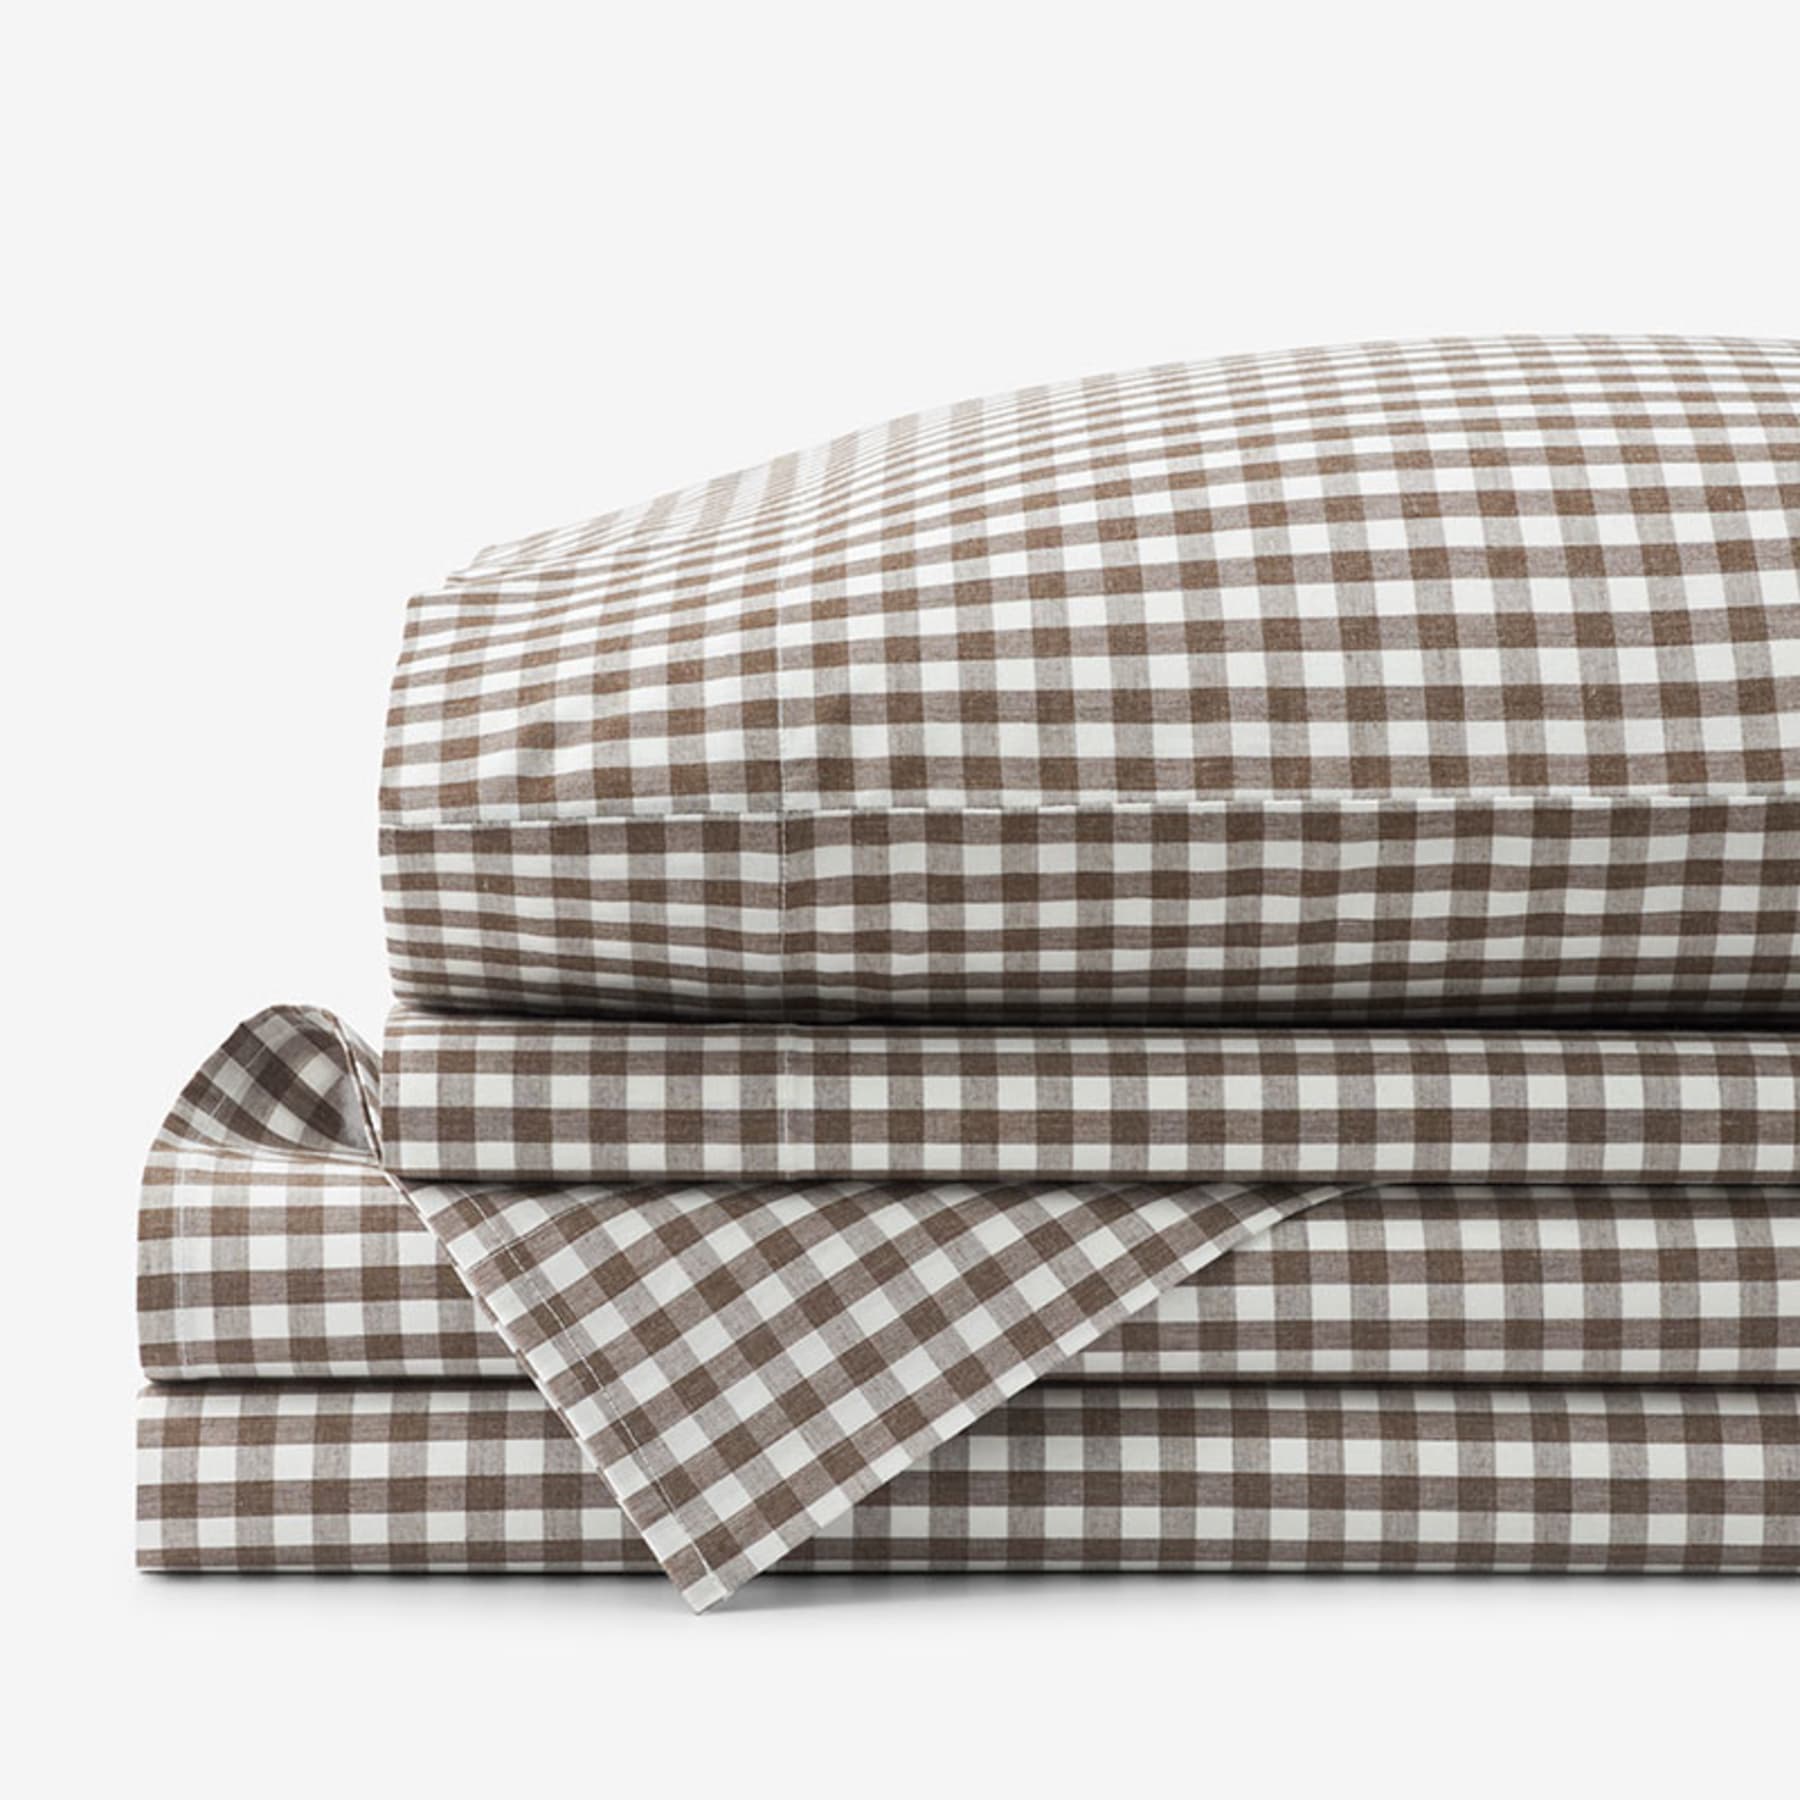 Gingham Classic Cool Melange Cotton Percale Bed Sheet Set - Brown, Queen | The Company Store